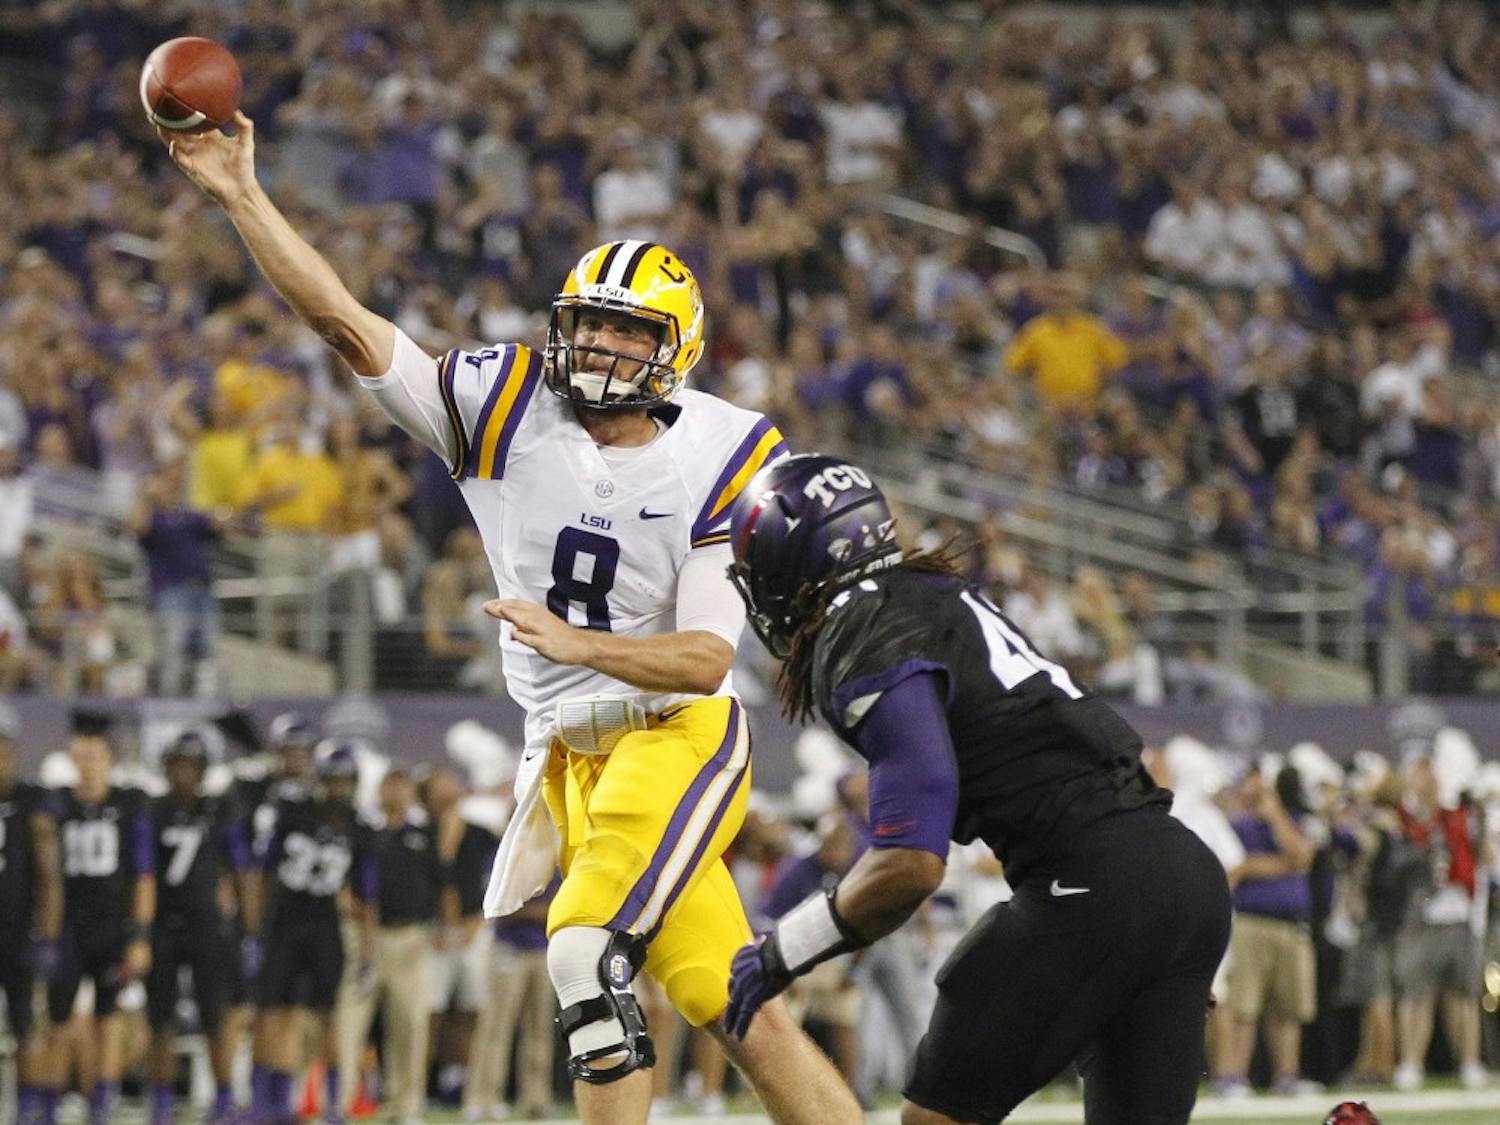 Louisiana quarterback Zach Mettenberger (8) throws under pressure from Texas Christian's Jonathan Anderson in the second quarter at Cowboys Stadium in Arlington, Texas, on Saturday, August 31, 2013. (Ron T. Ennis/Fort Worth Star-Telegram/MCT)